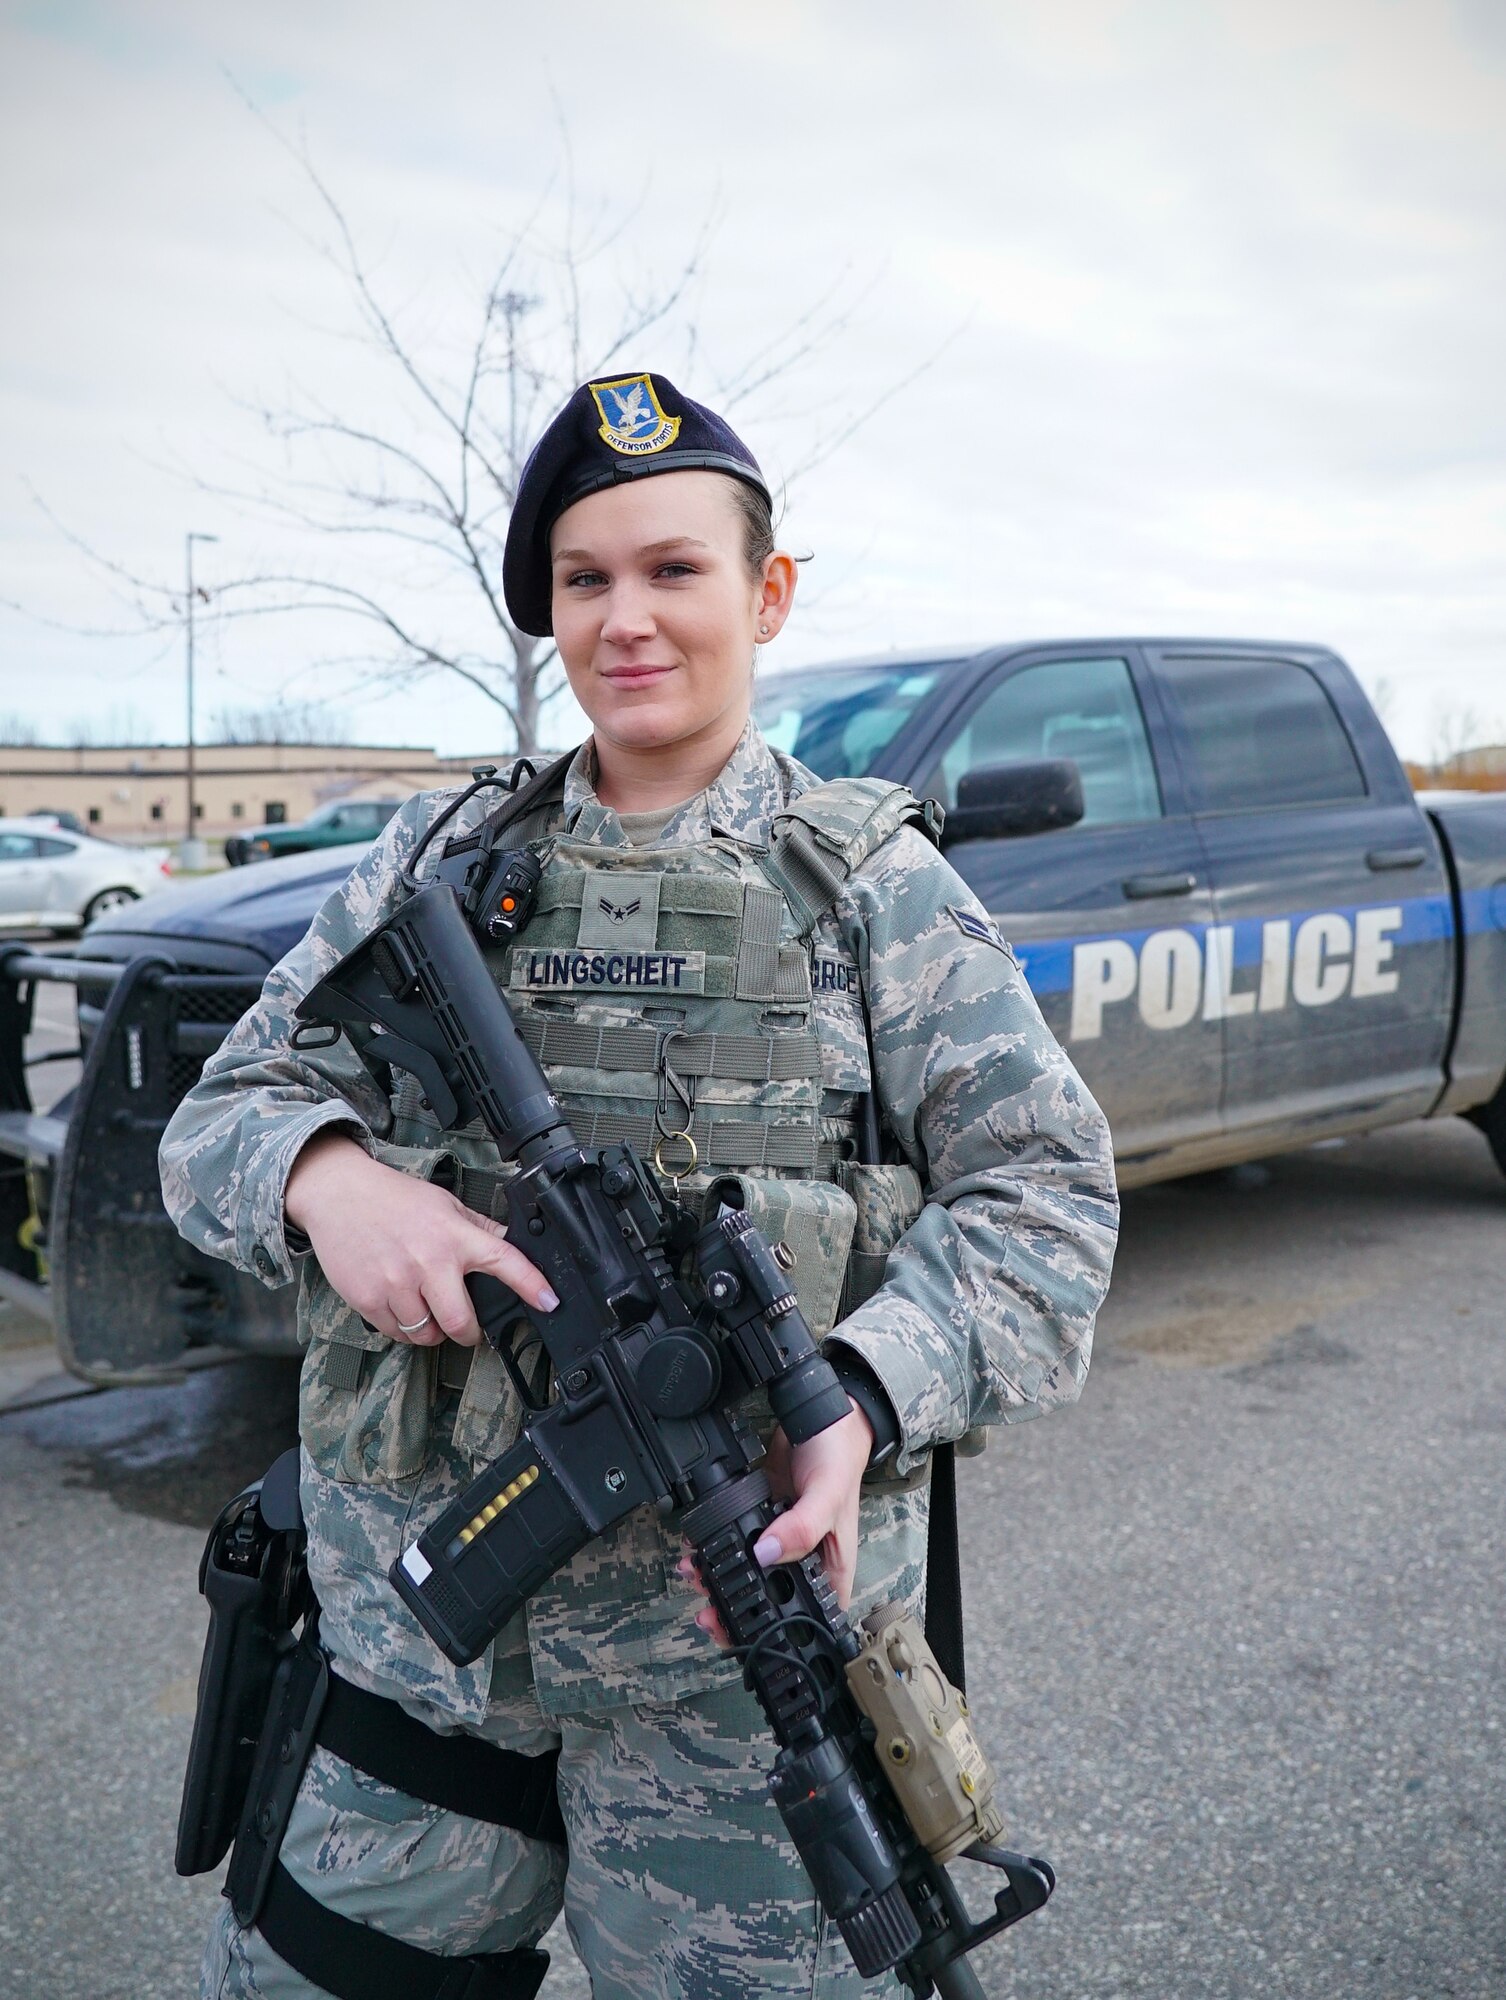 Airman 1st Class Taylor Lingscheit, 319th Security Forces Squadron installation entry controller, poses for a photo on National First Responders Day, Oct. 28, 2019, on Grand Forks Air Force Base, North Dakota. Lingscheit said she feels rewarded, knowing her line of duty puts her in a position to defend the base. (U.S. Air Force photo by Senior Airman Elora J. Martinez)